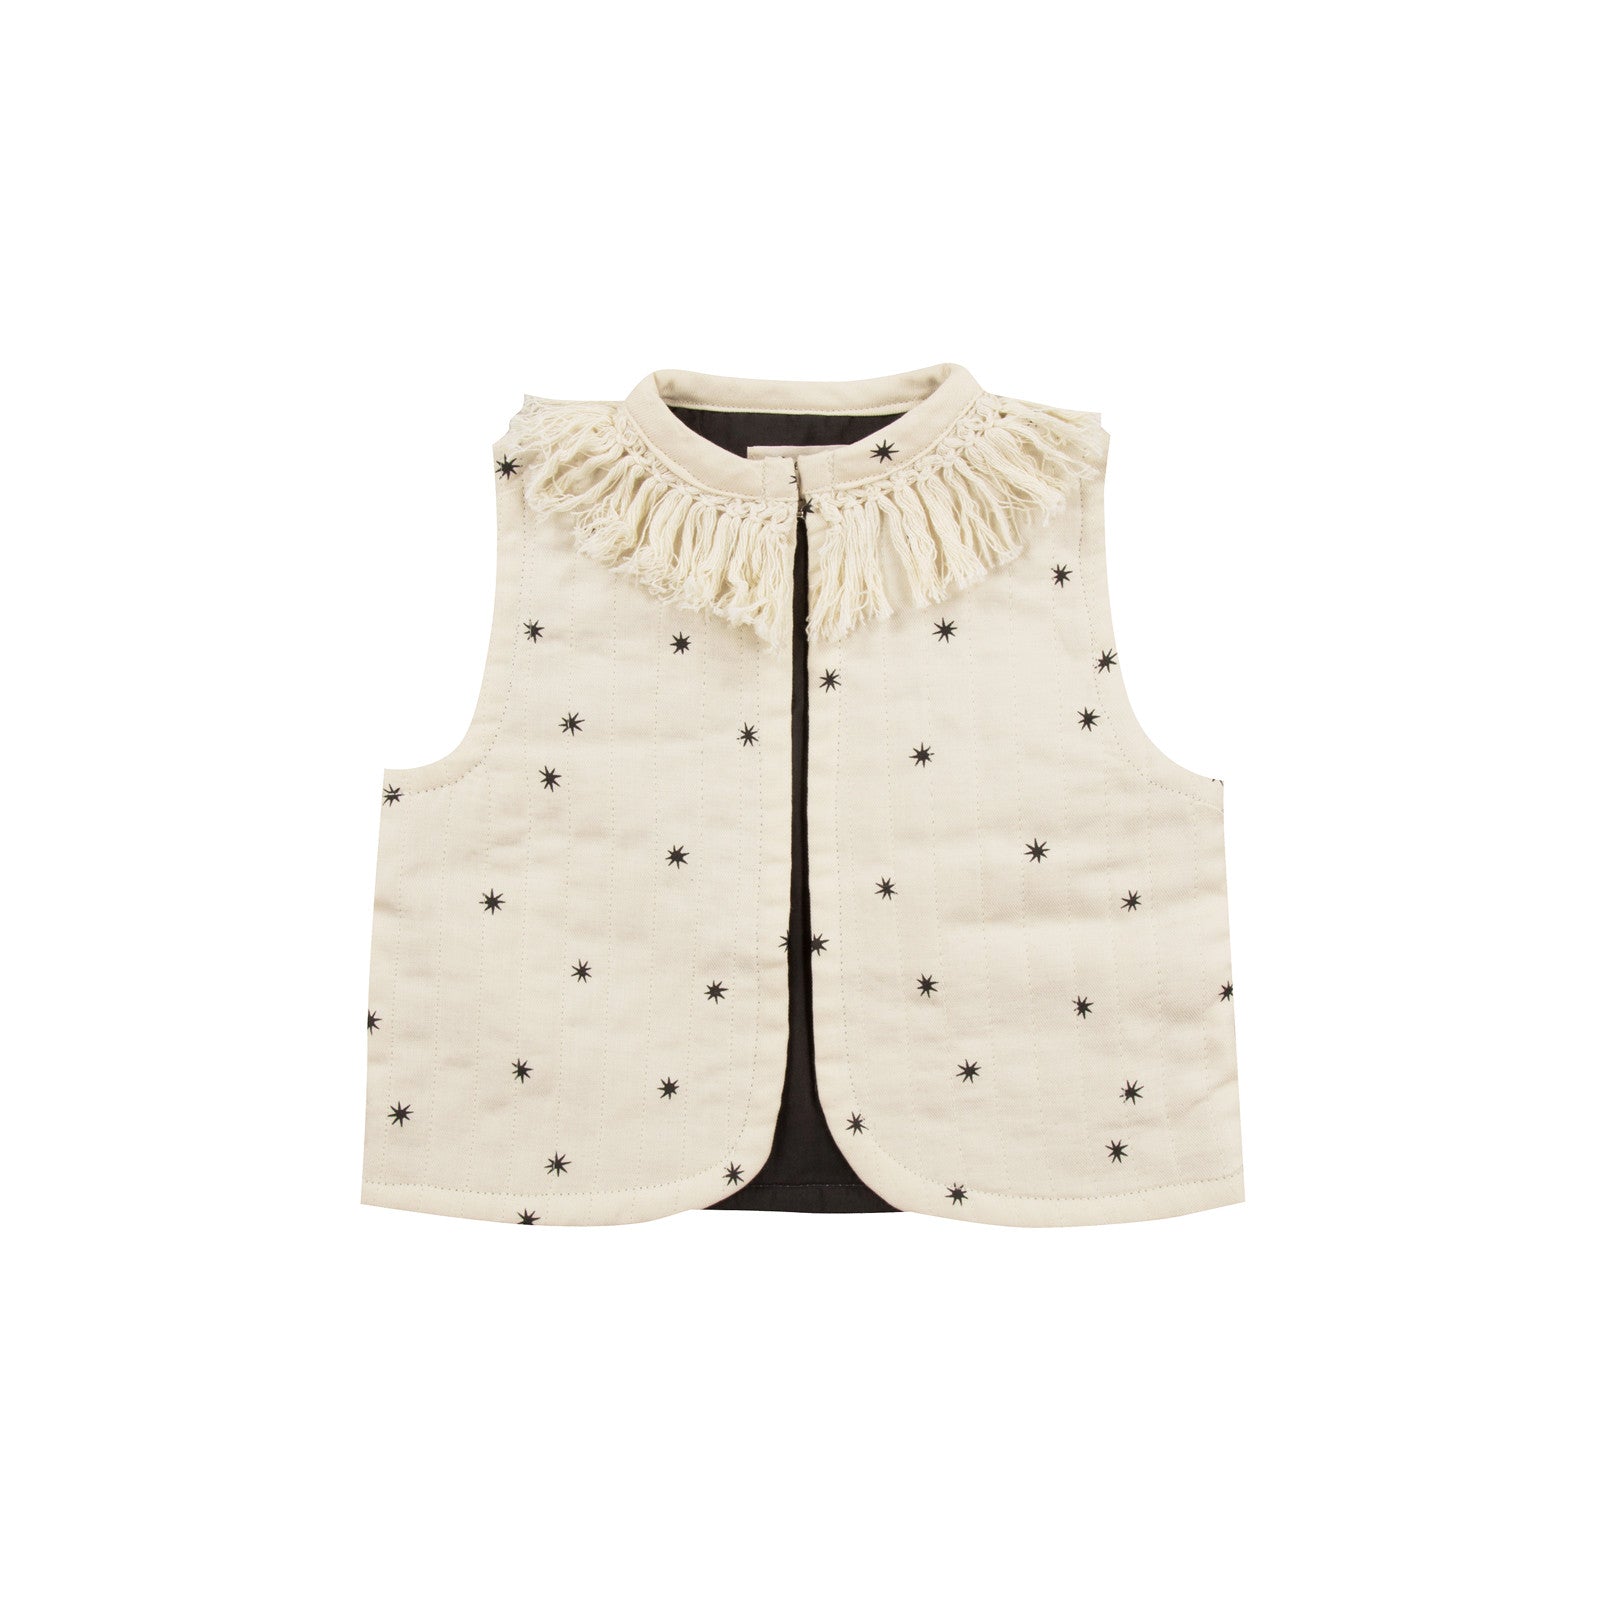 Baby Vest with fringes by Rylee and Cru at Bonjour Baby Baskets